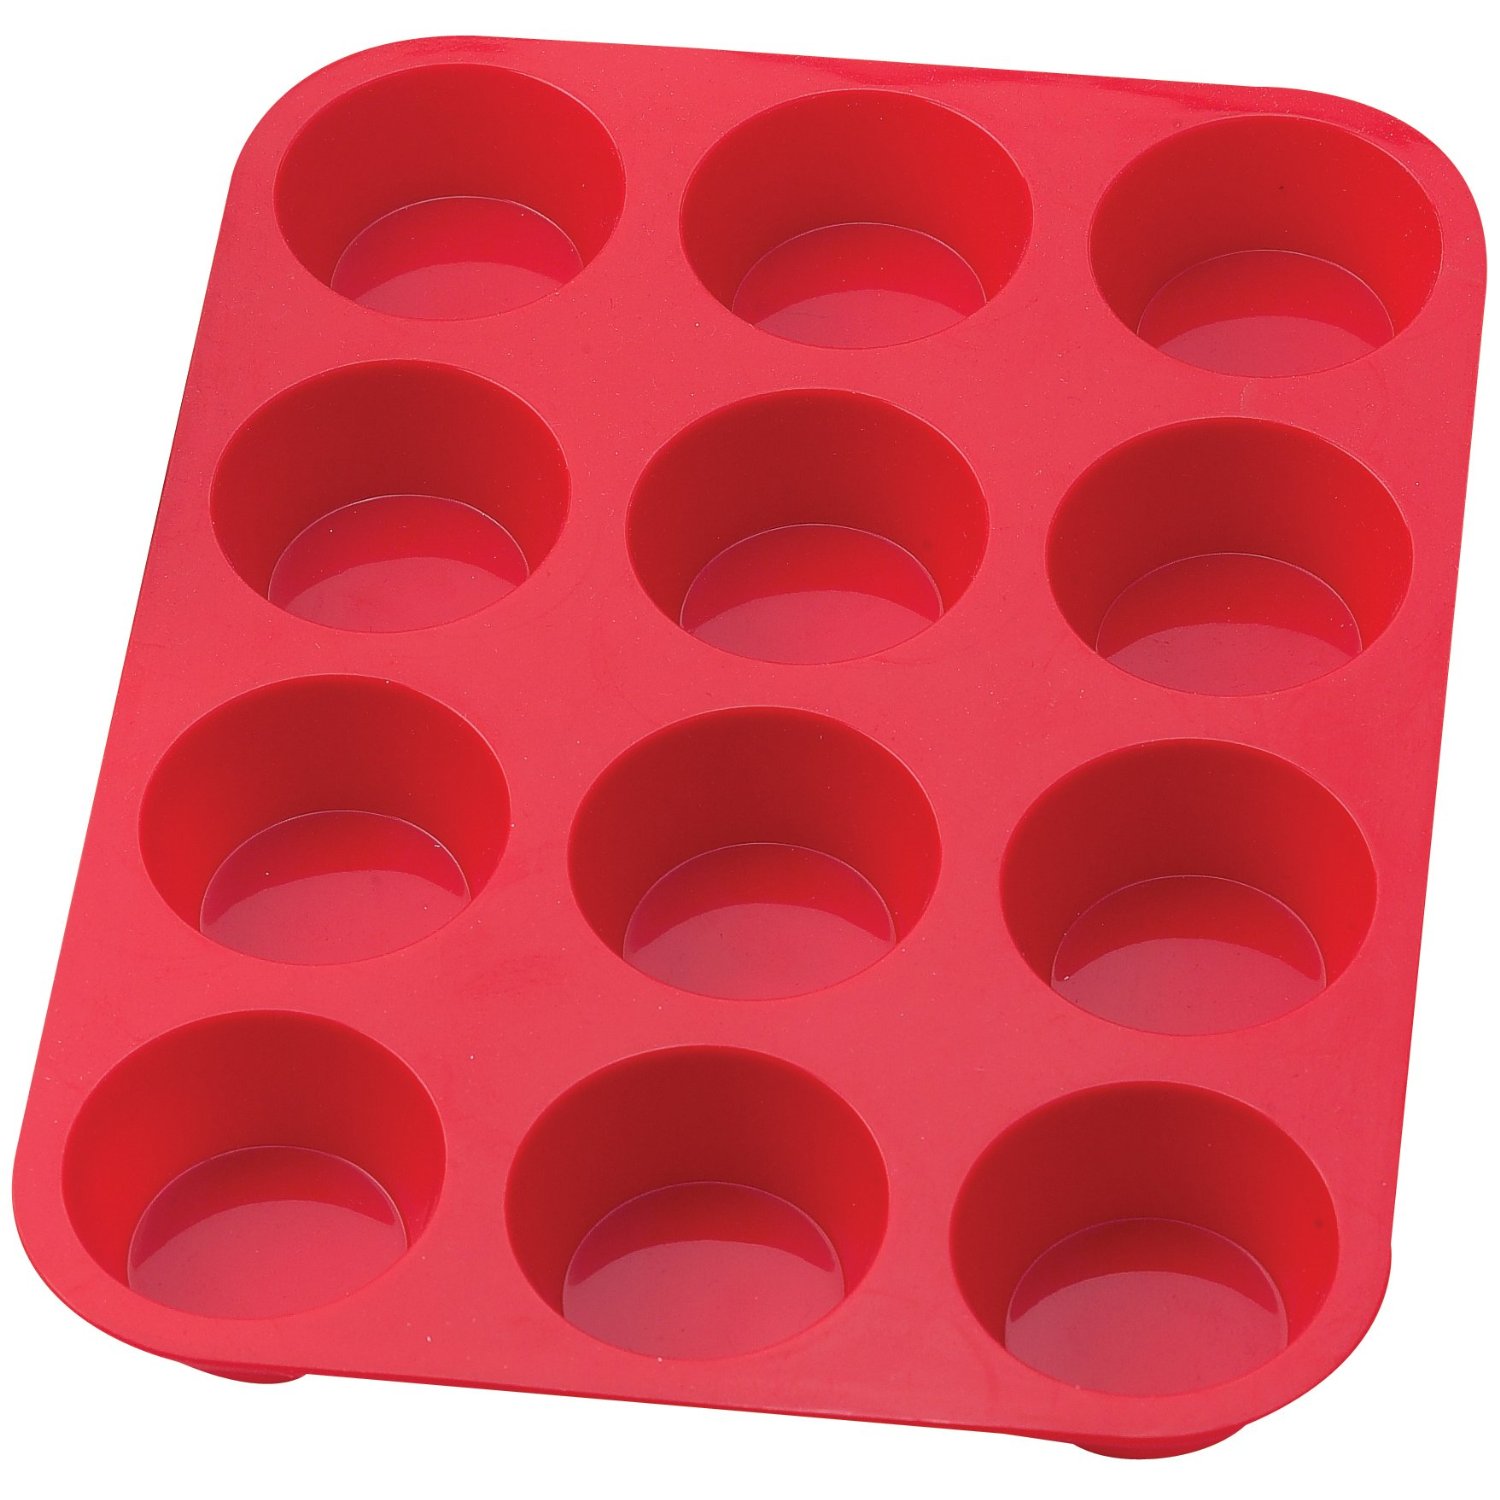 Baking With Silicone Muffin Pans 12